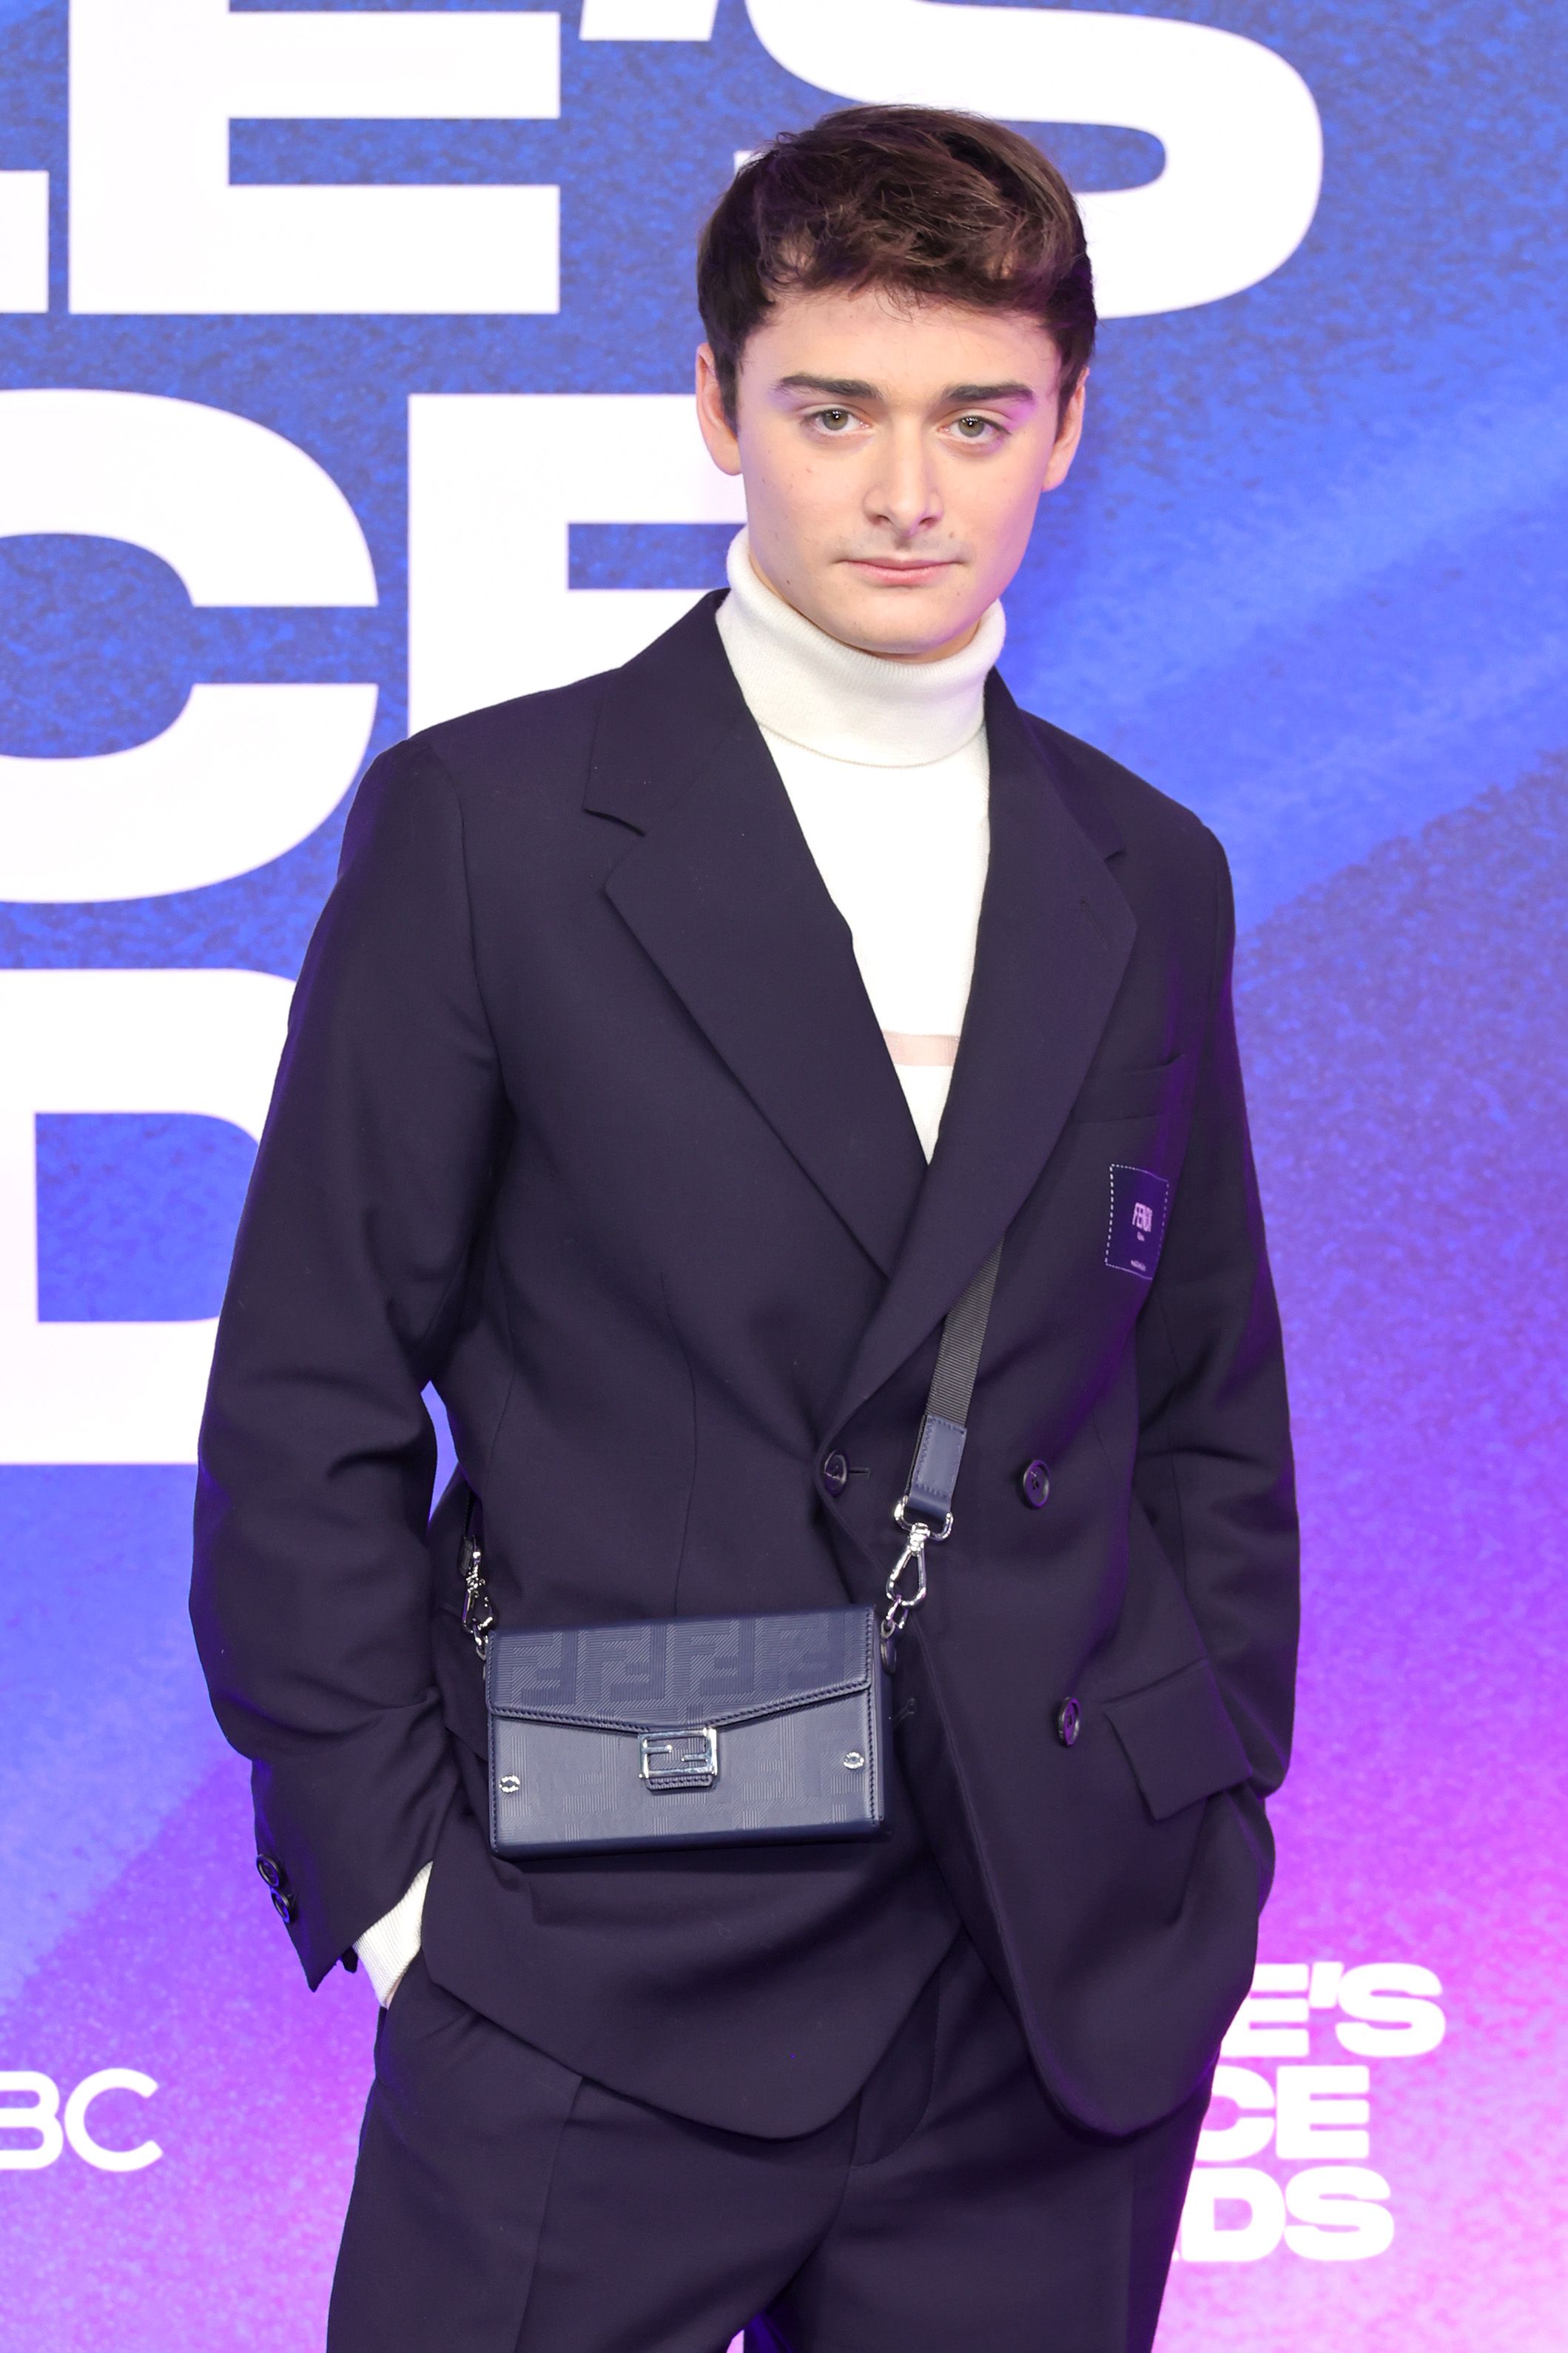 Stranger Things' Star Noah Schnapp Comes Out as Gay